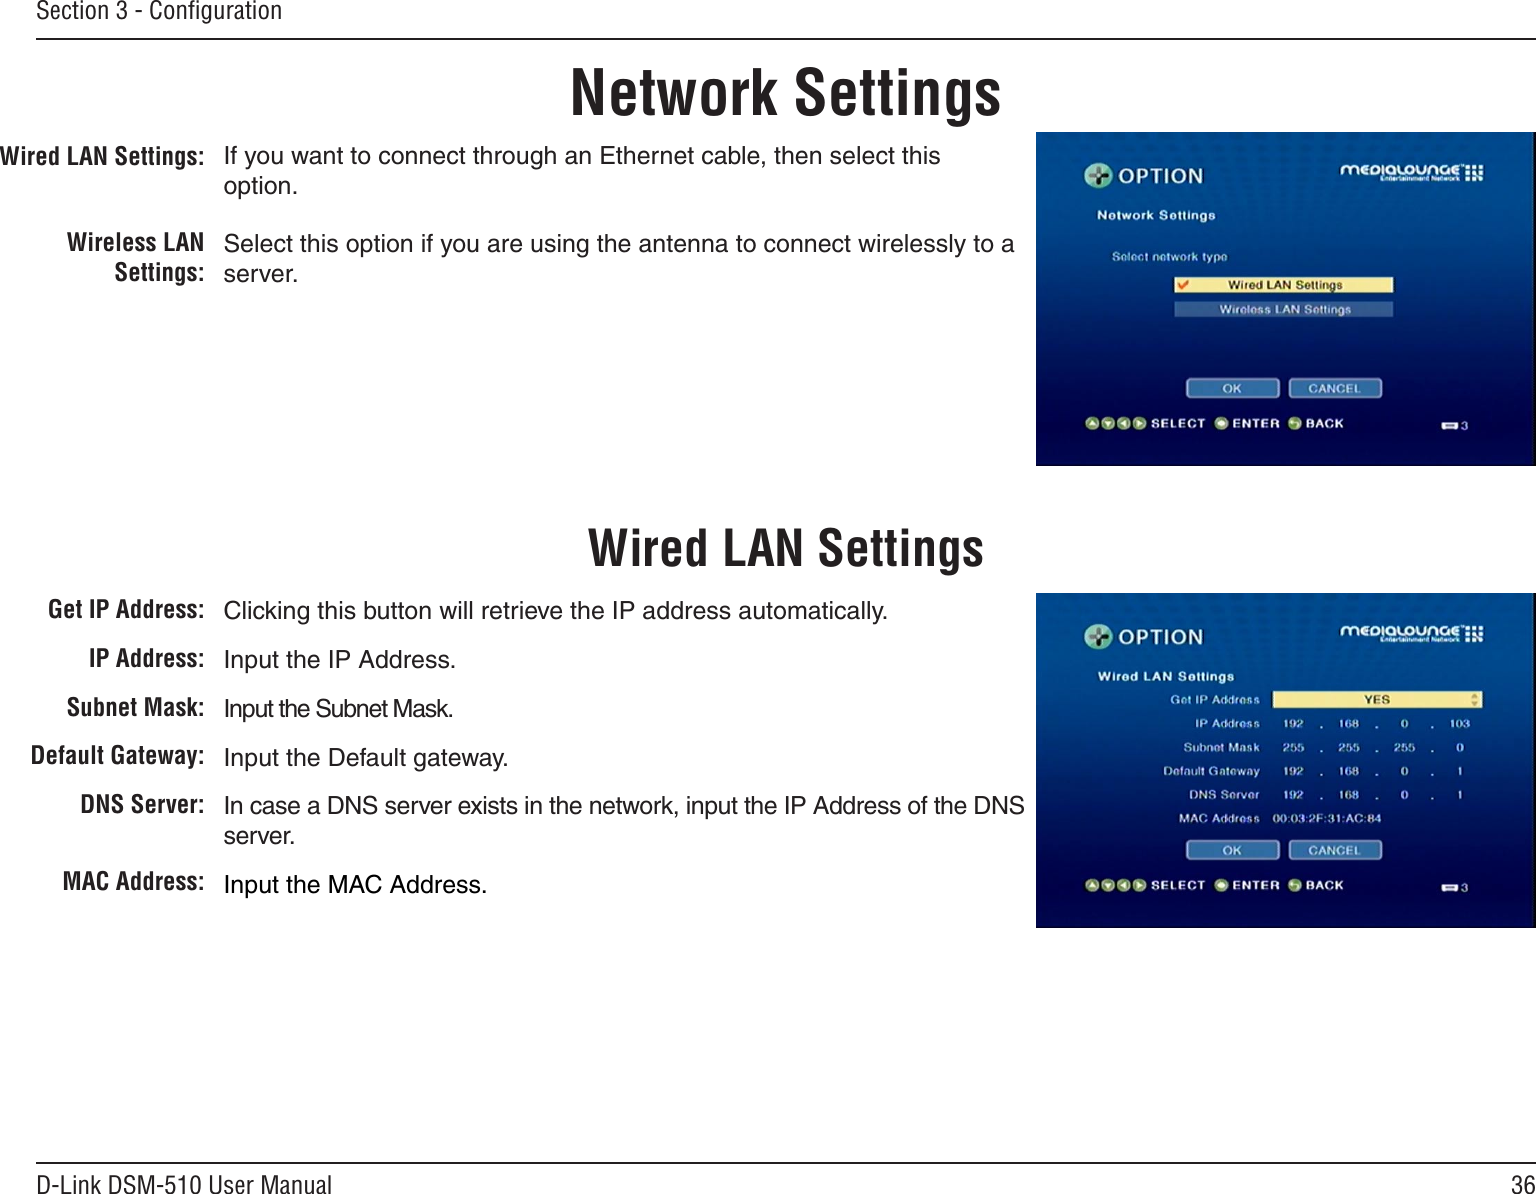 36D-Link DSM-510 User ManualSection 3 - ConﬁgurationWired LAN Settings:Wireless LAN Settings:If you want to connect through an Ethernet cable, then select this option.Select this option if you are using the antenna to connect wirelessly to a server.Network SettingsWired LAN SettingsGet IP Address:IP Address:Subnet Mask:Default Gateway:   DNS Server:MAC Address:Clicking this button will retrieve the IP address automatically.Input the IP Address.Input the Subnet Mask.Input the Default gateway.In case a DNS server exists in the network, input the IP Address of the DNS server.Input the MAC Address.